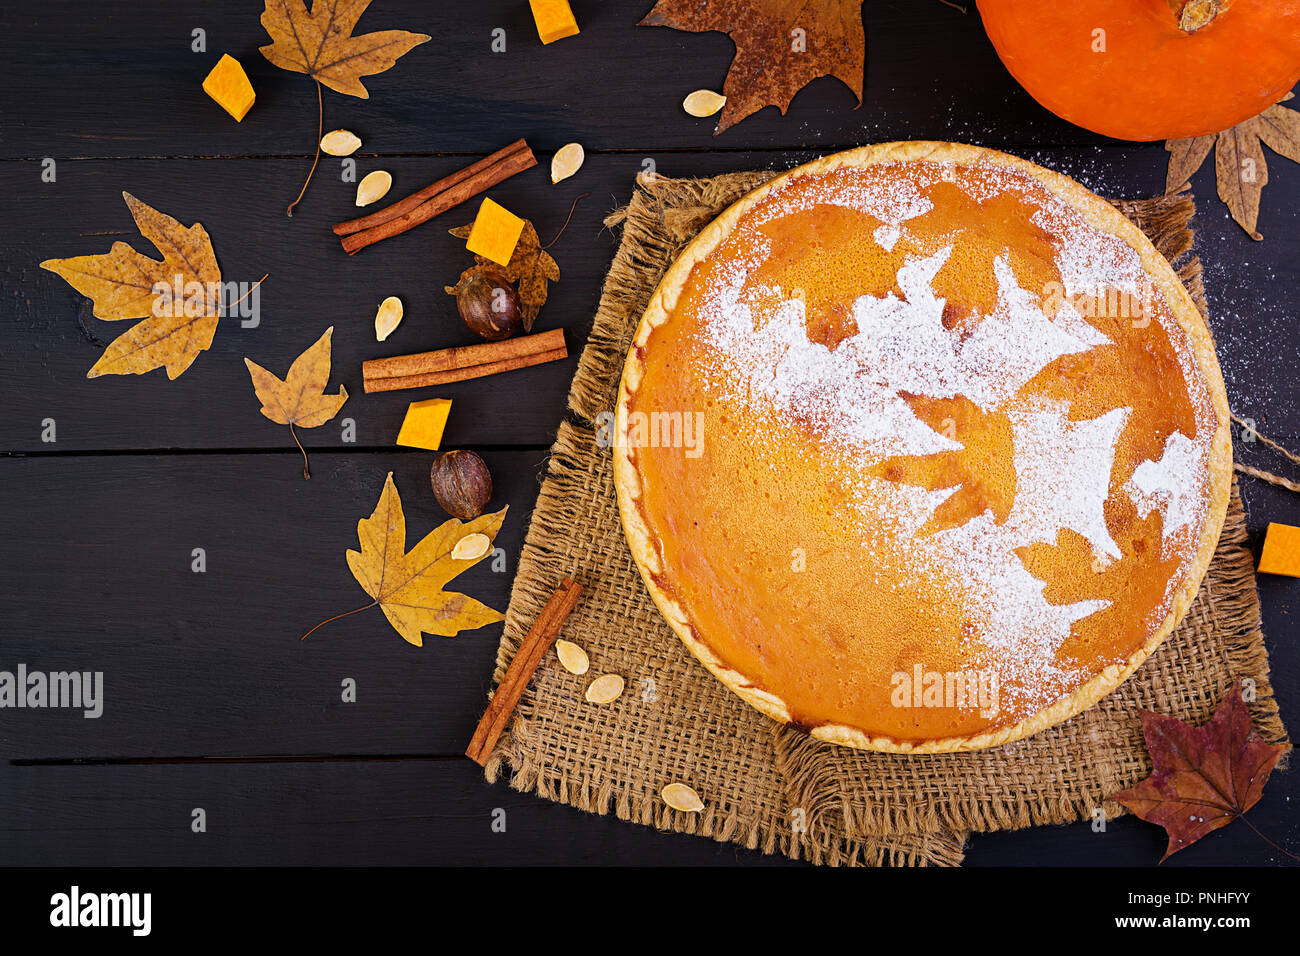 American homemade pumpkin pie with cinnamon and nutmeg, pumpkin seeds and autumn leaves on a wooden table. Thanksgiving food. Top view. Flat lay Stock Photo